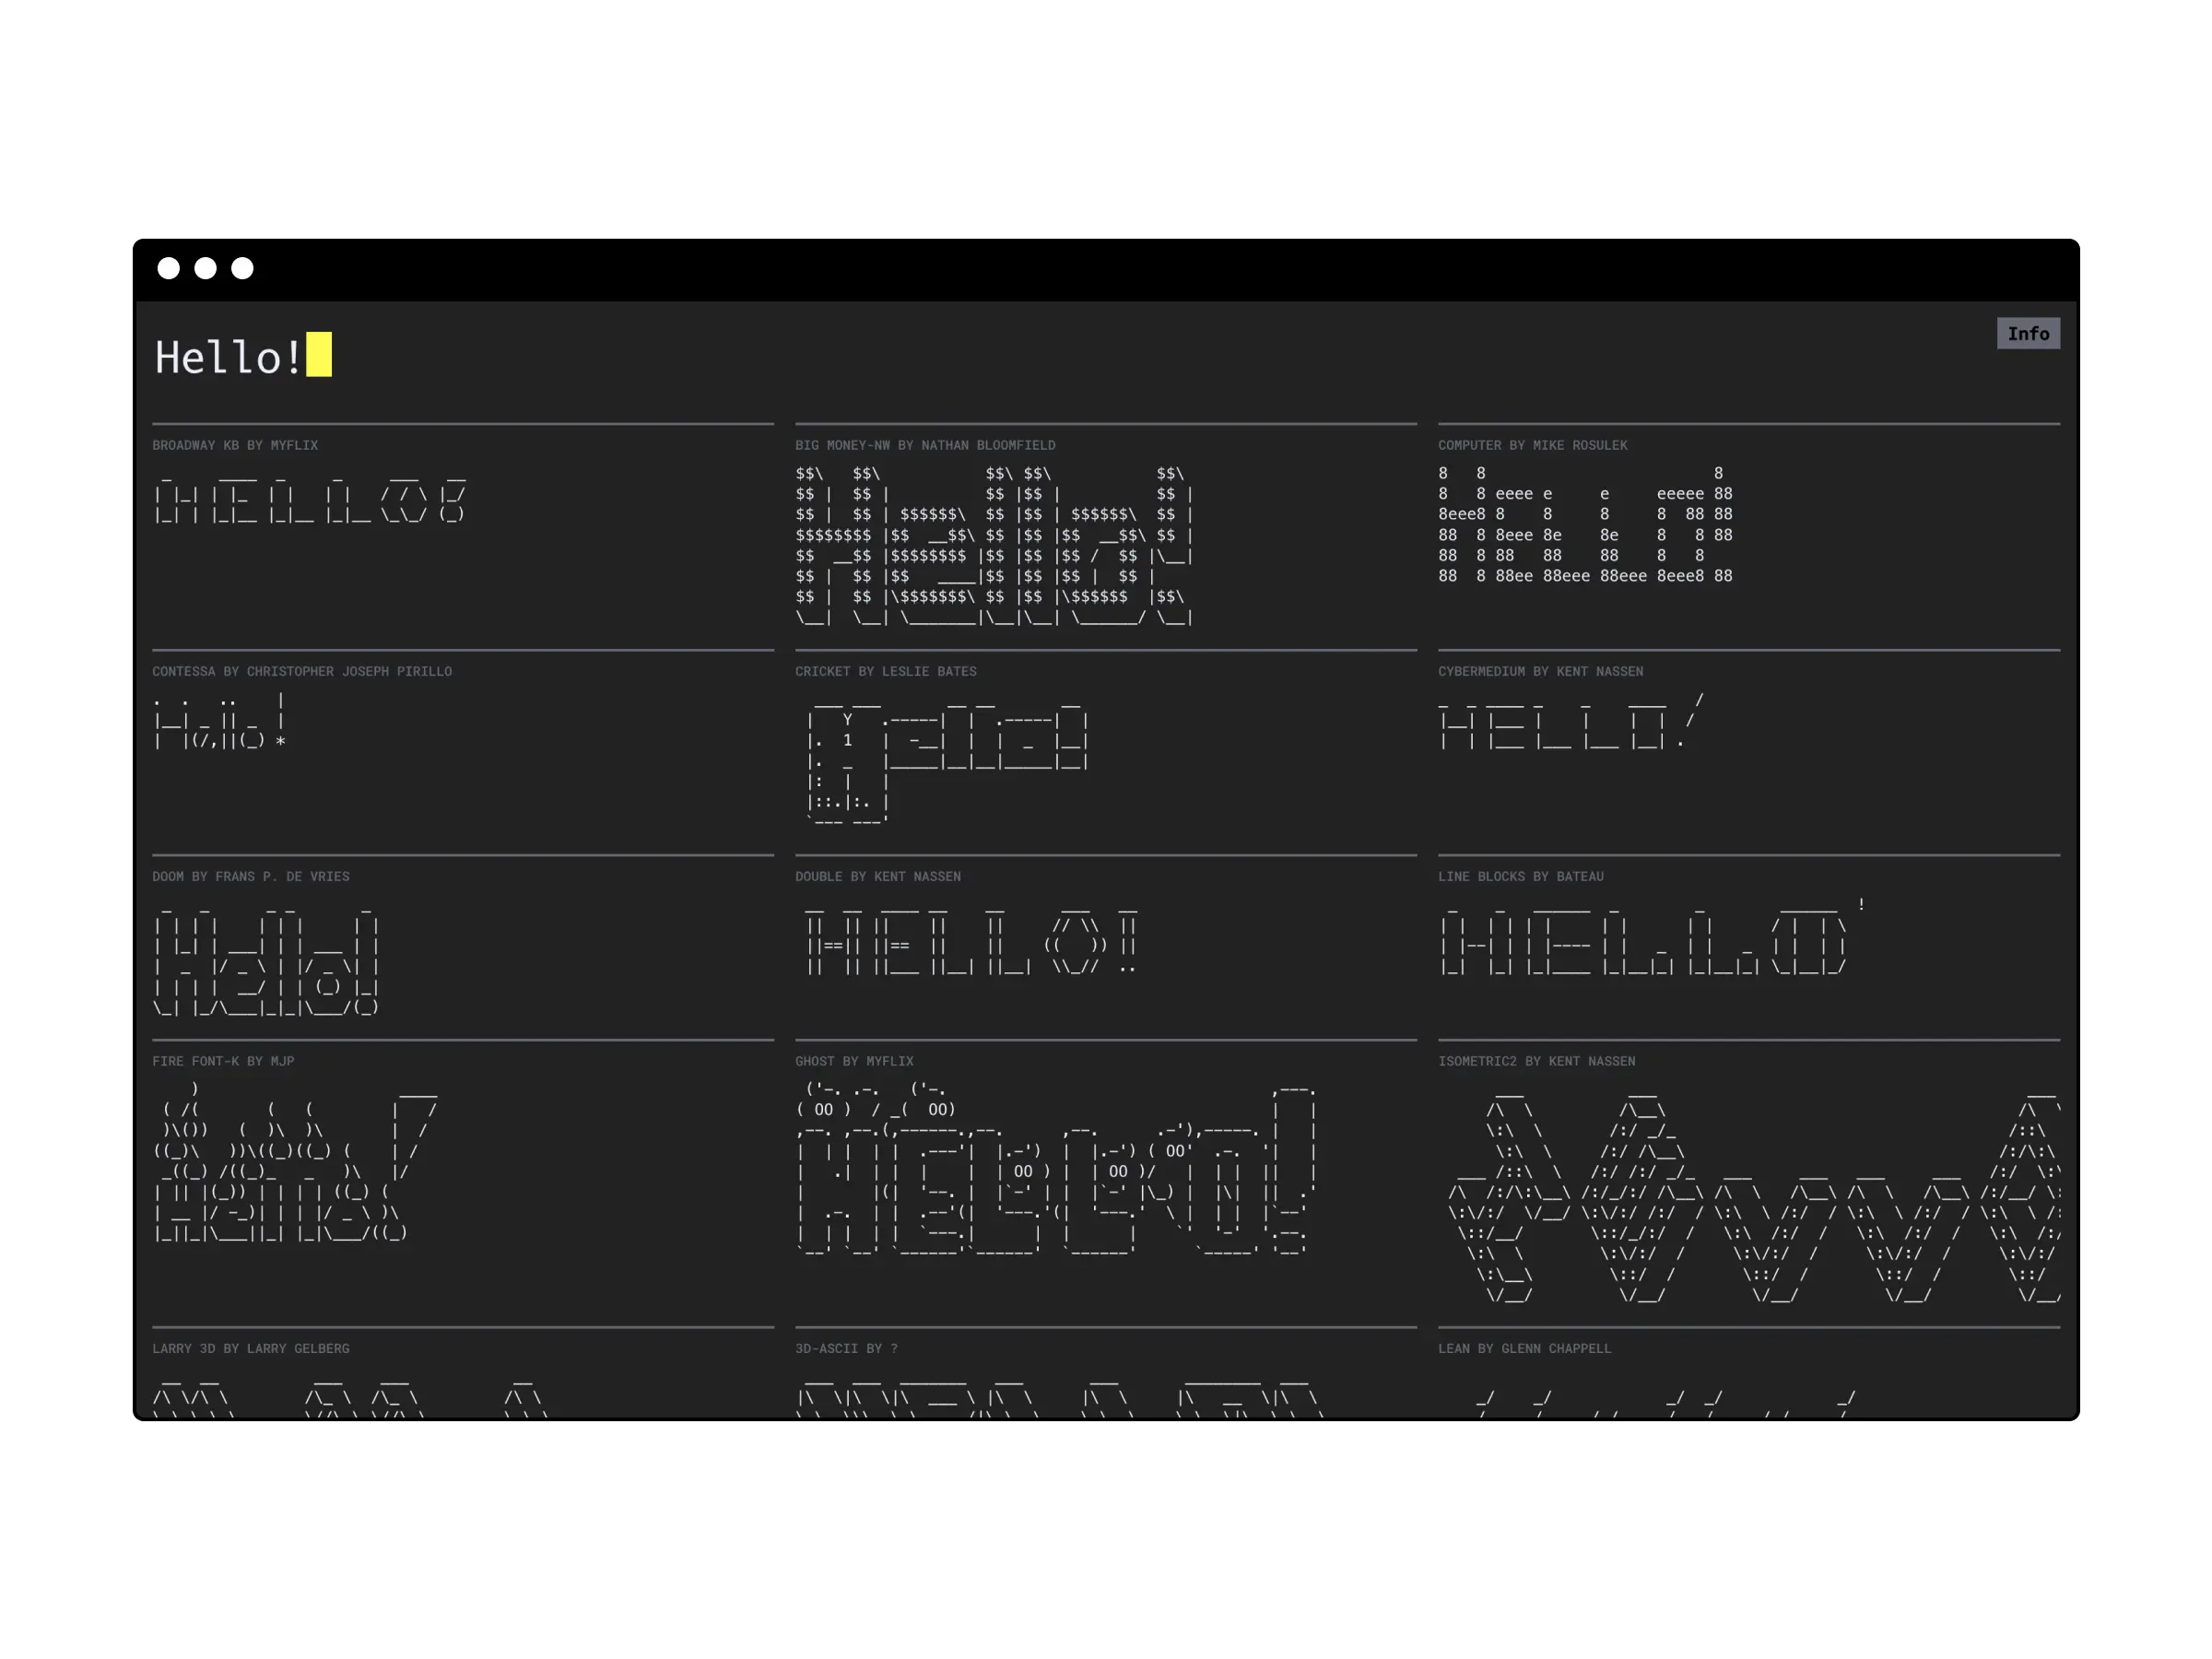 screenshot a UI that shows the word Hello! written in a variety of ascii fonts, often using slashes and other non alphabetical characters to construct the letters